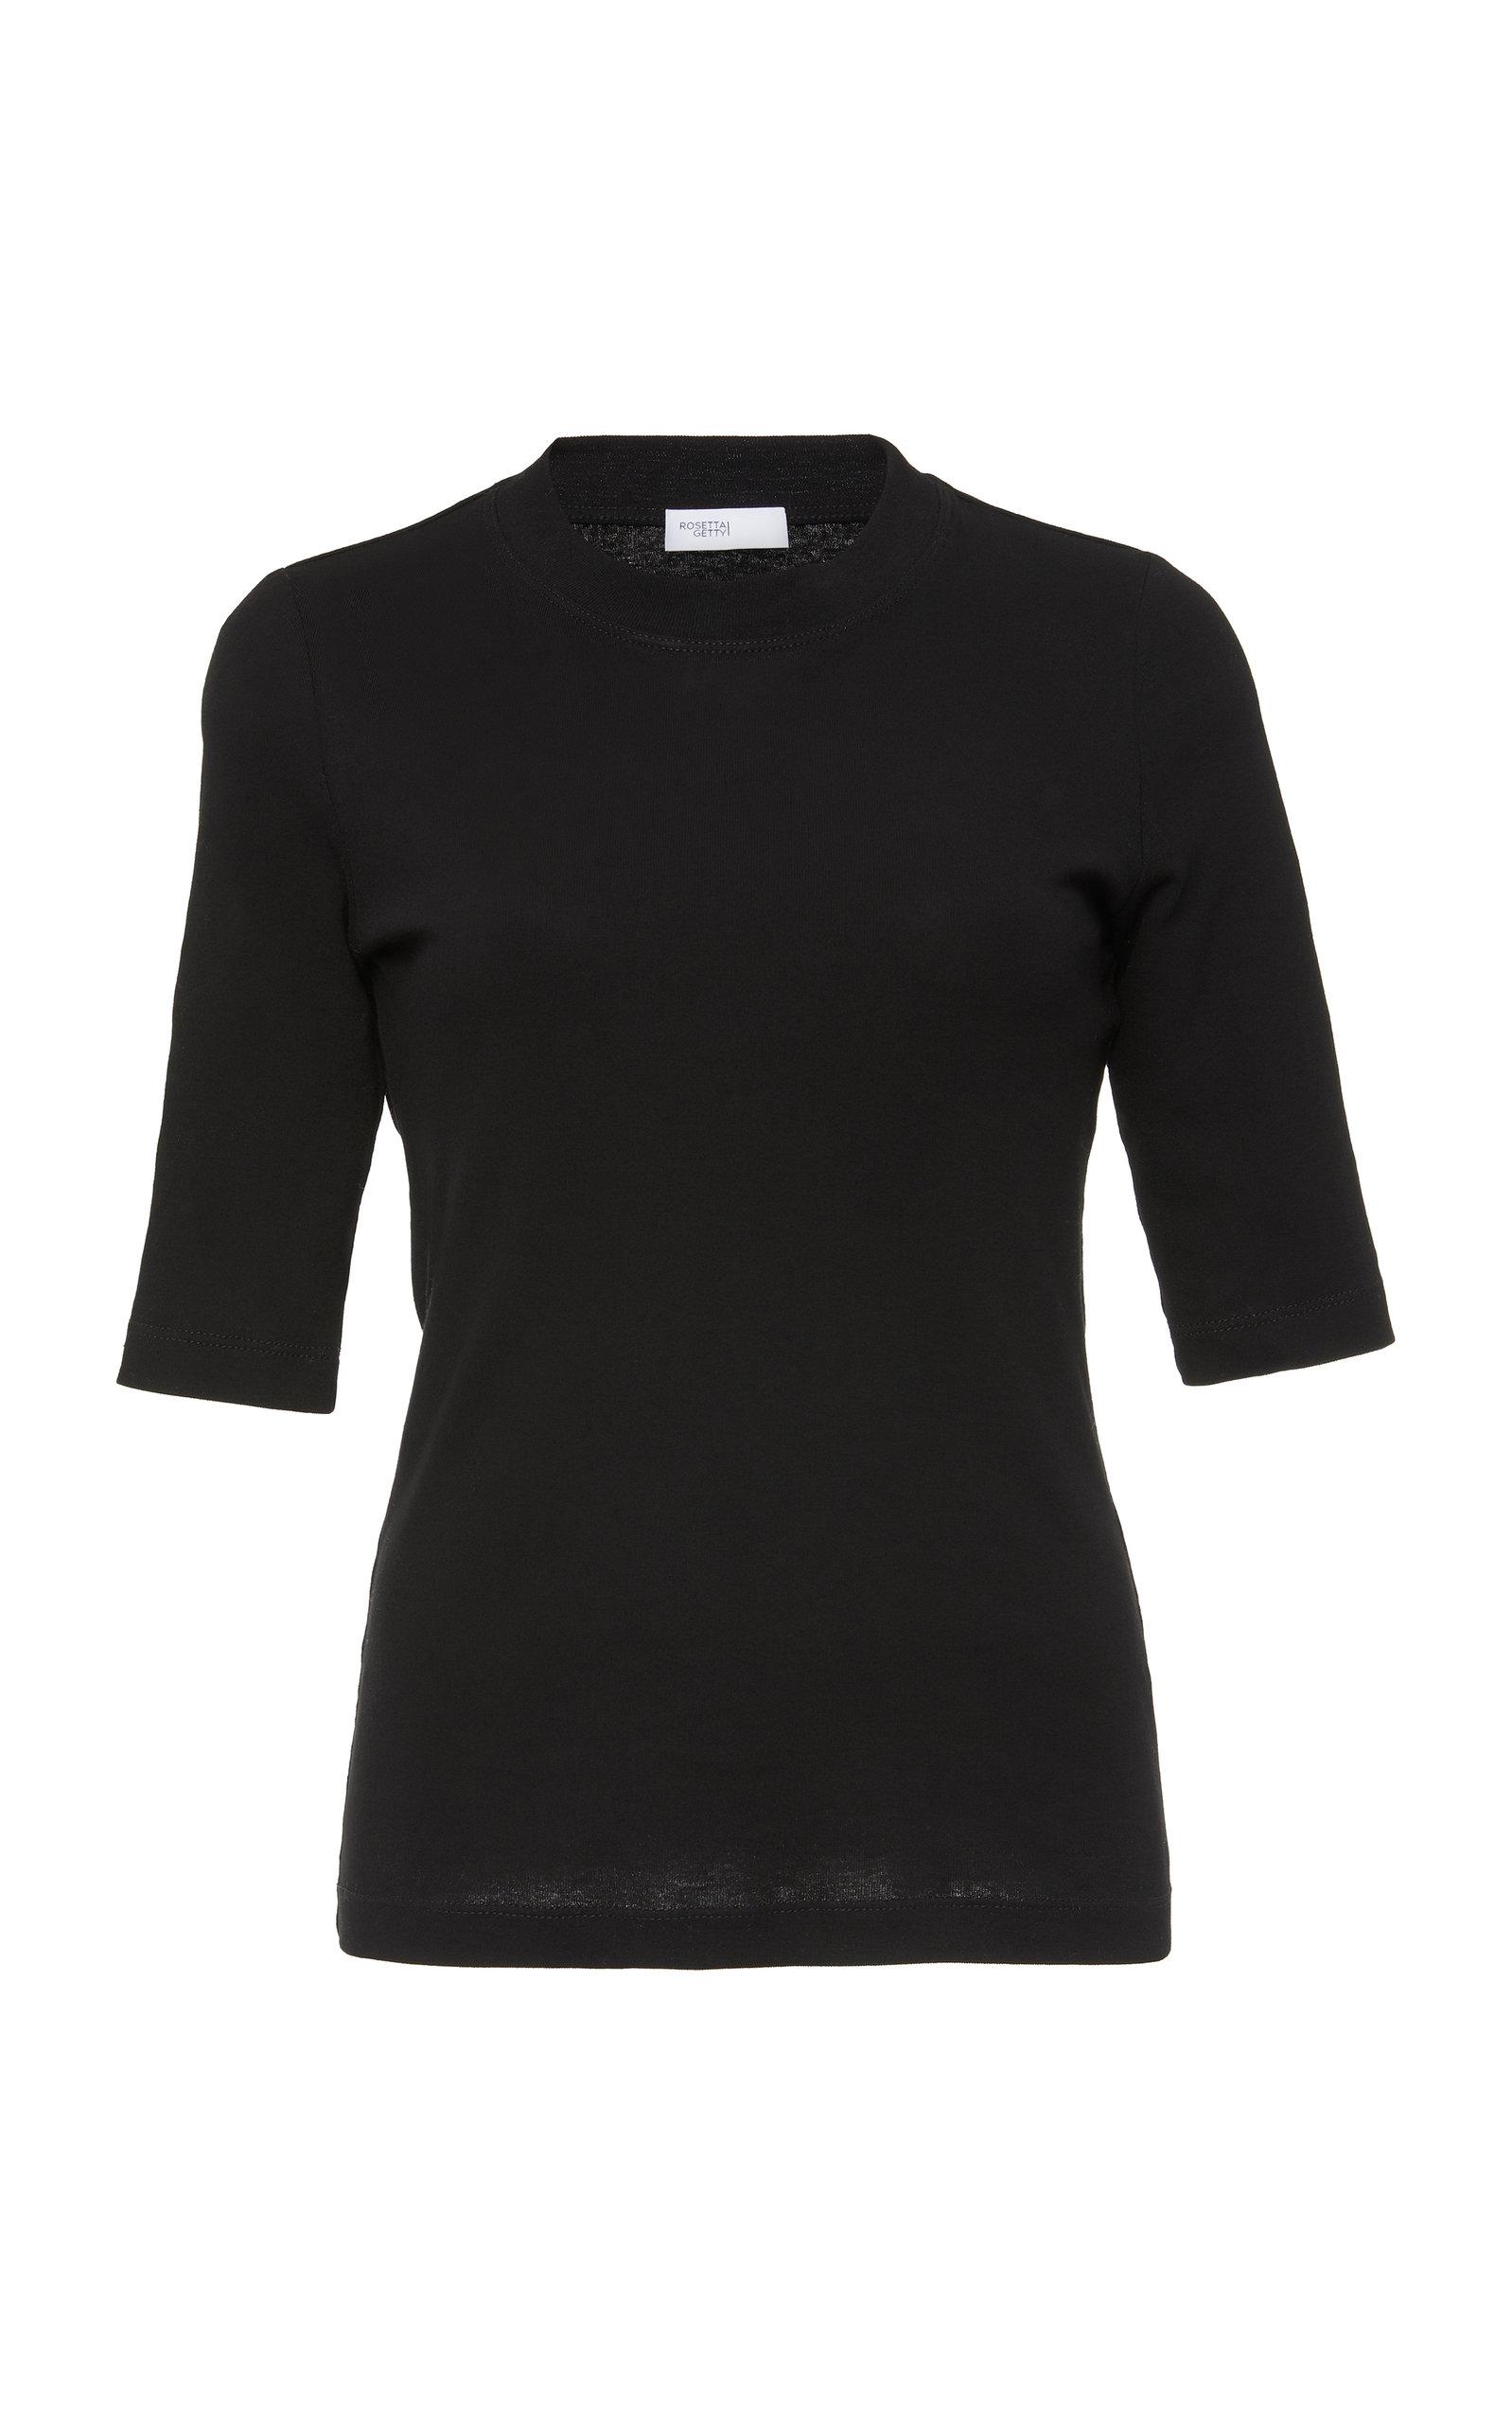 Rosetta Getty Elbow-length Fitted Cotton T-shirt in Black - Lyst